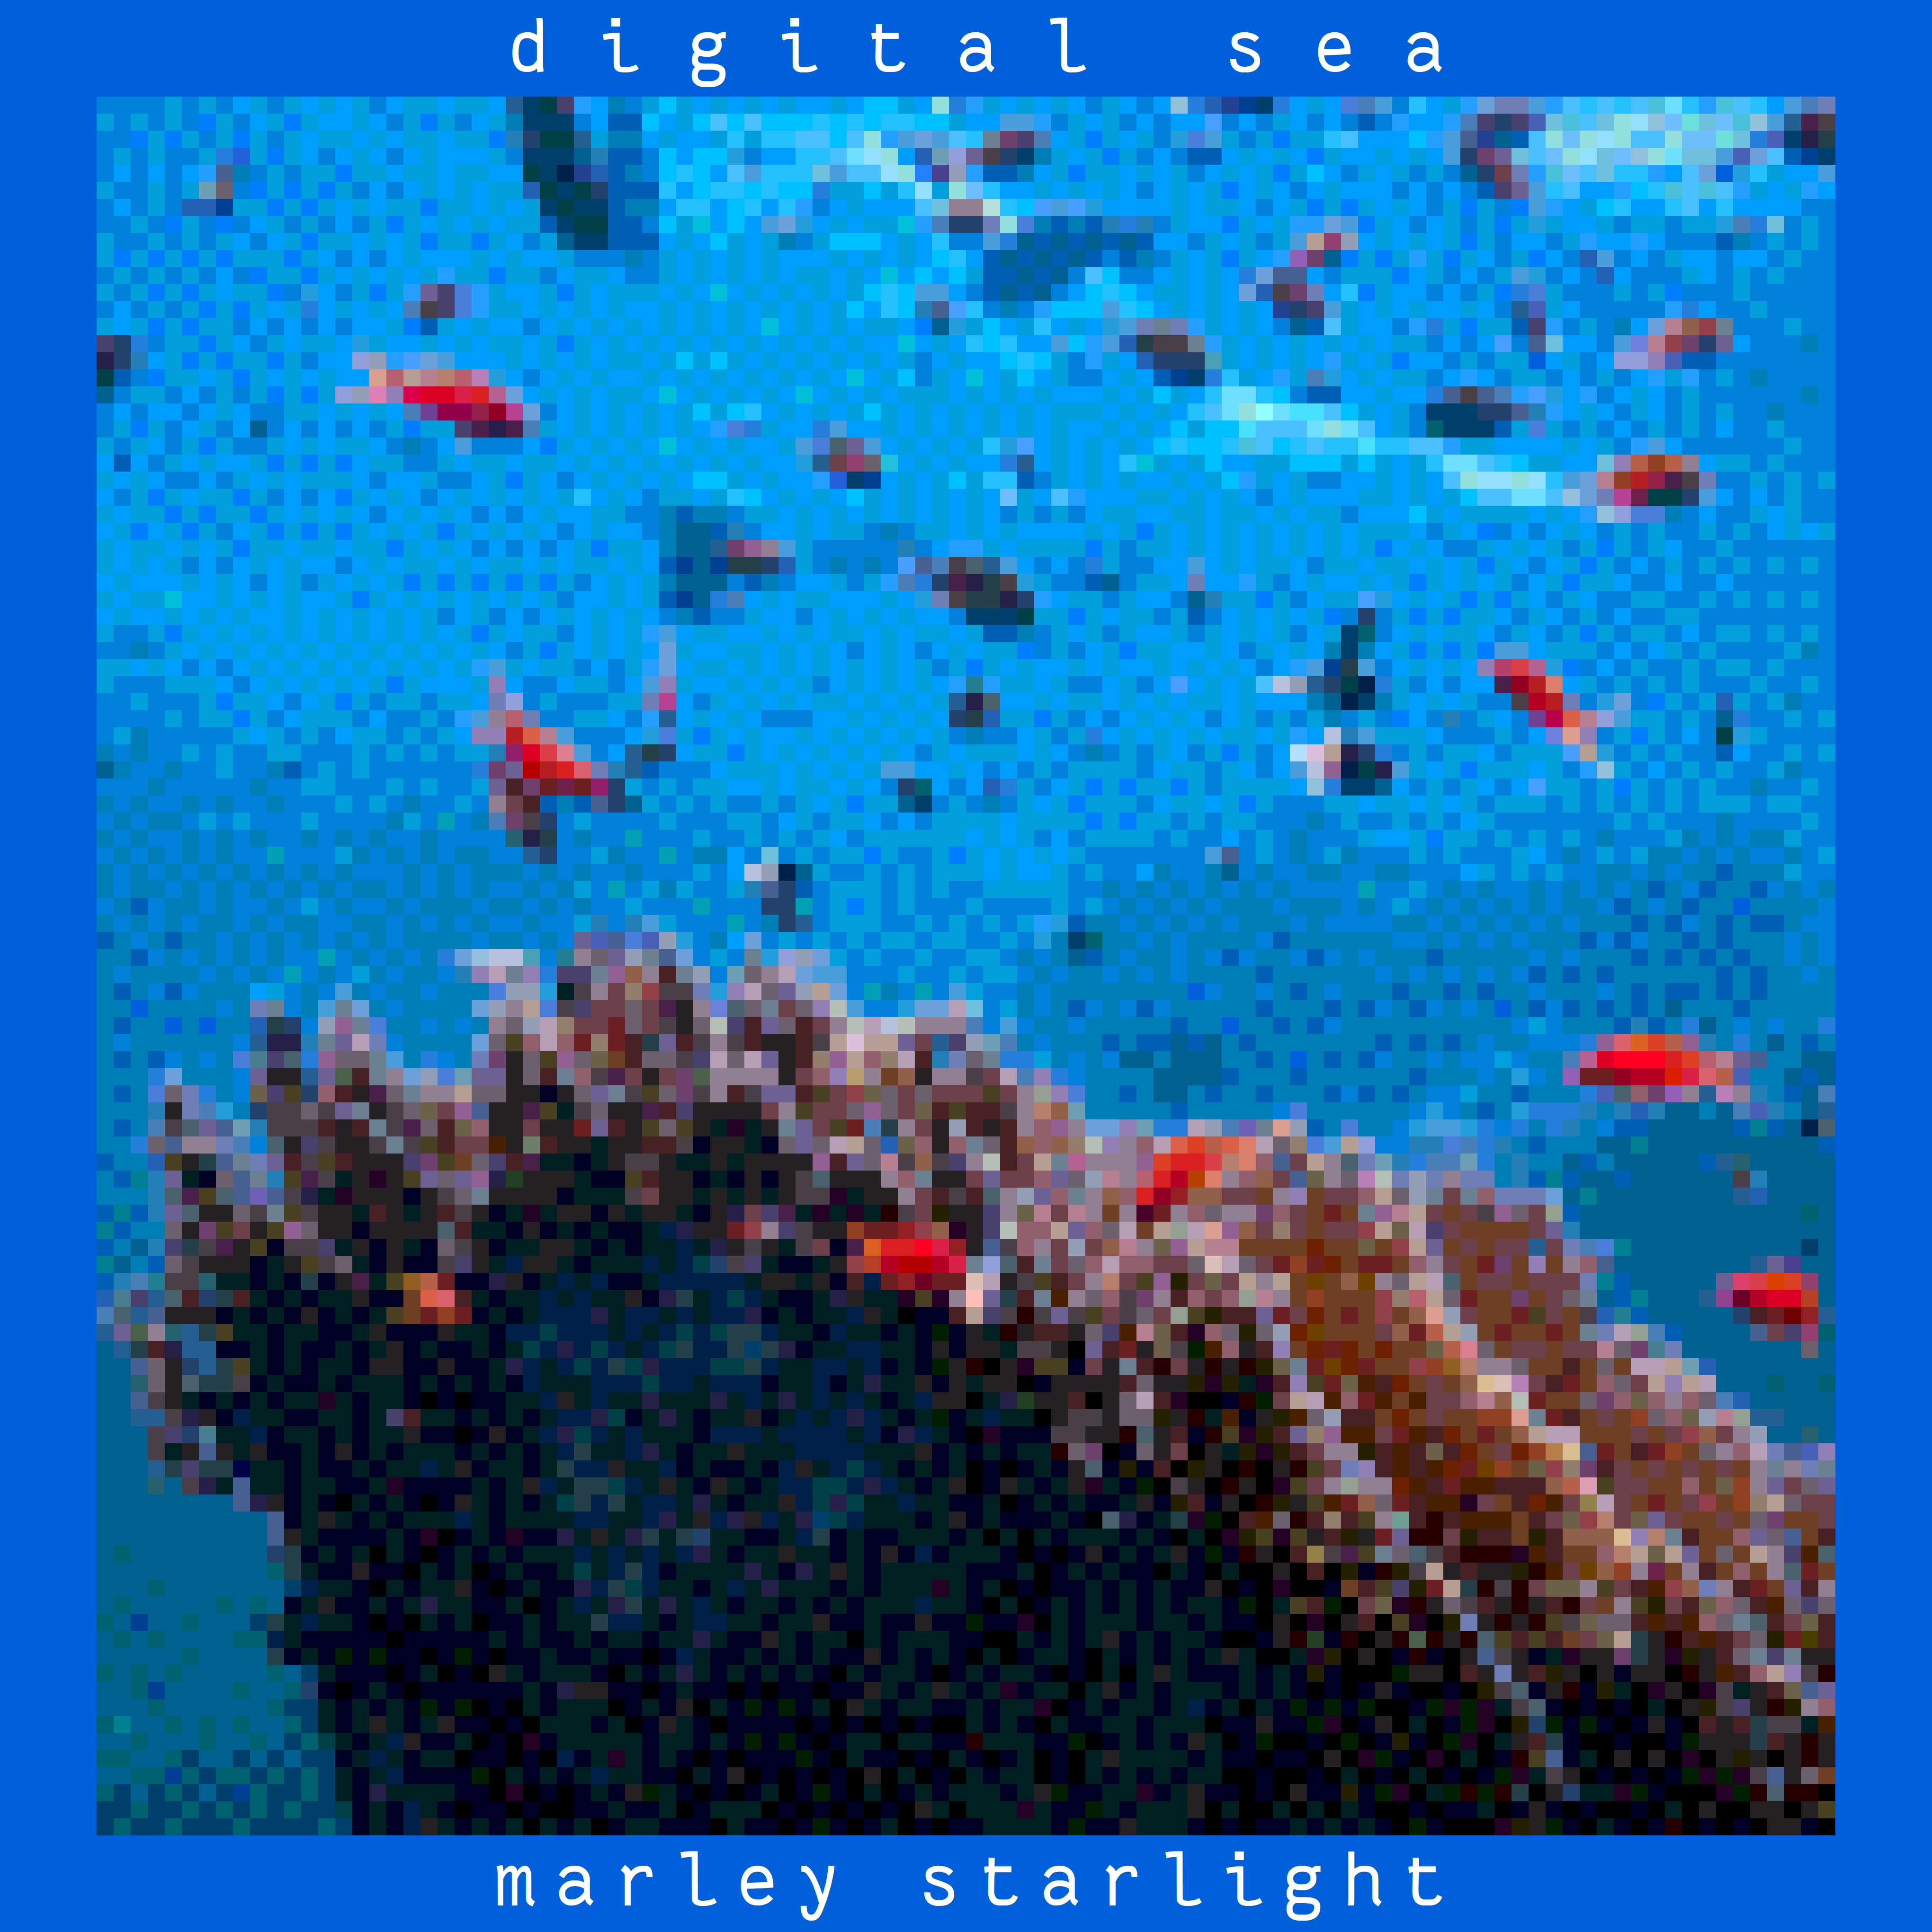 Cover art for Digital Sea by Marley Starlight: a pixelated image of fish underwater.